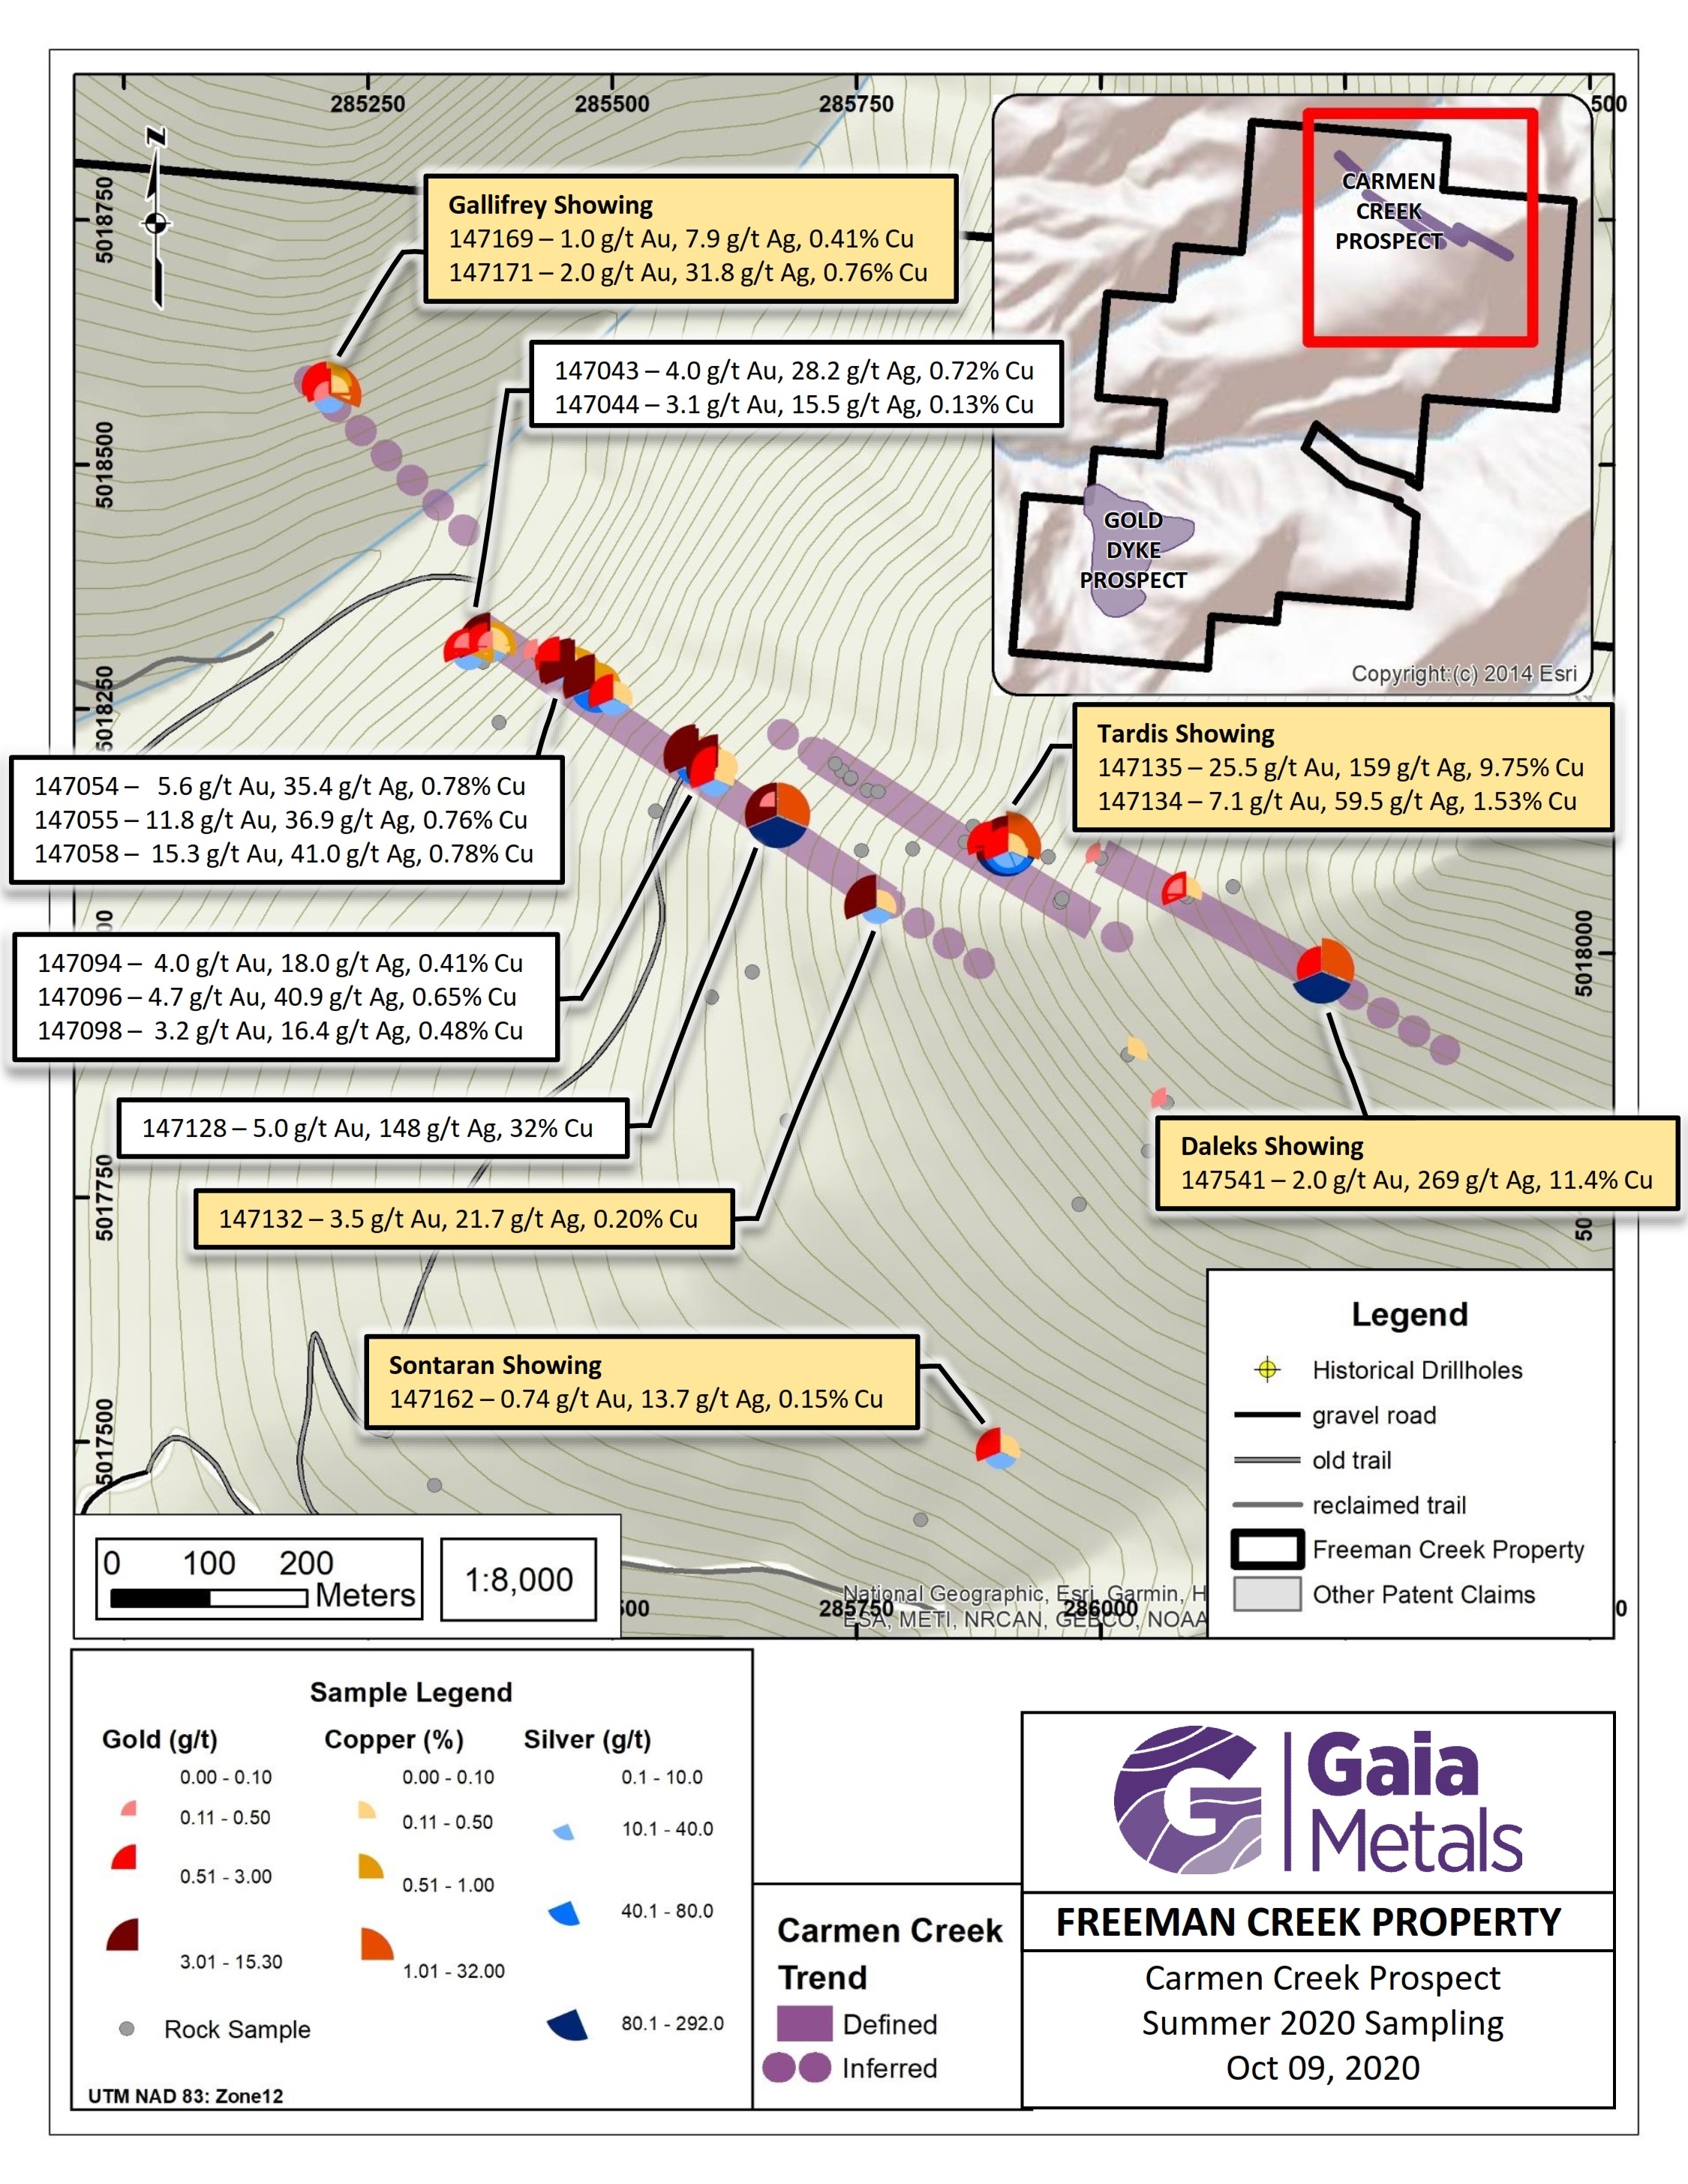 Gaia Metals Corp., Tuesday, October 13, 2020, Press release picture